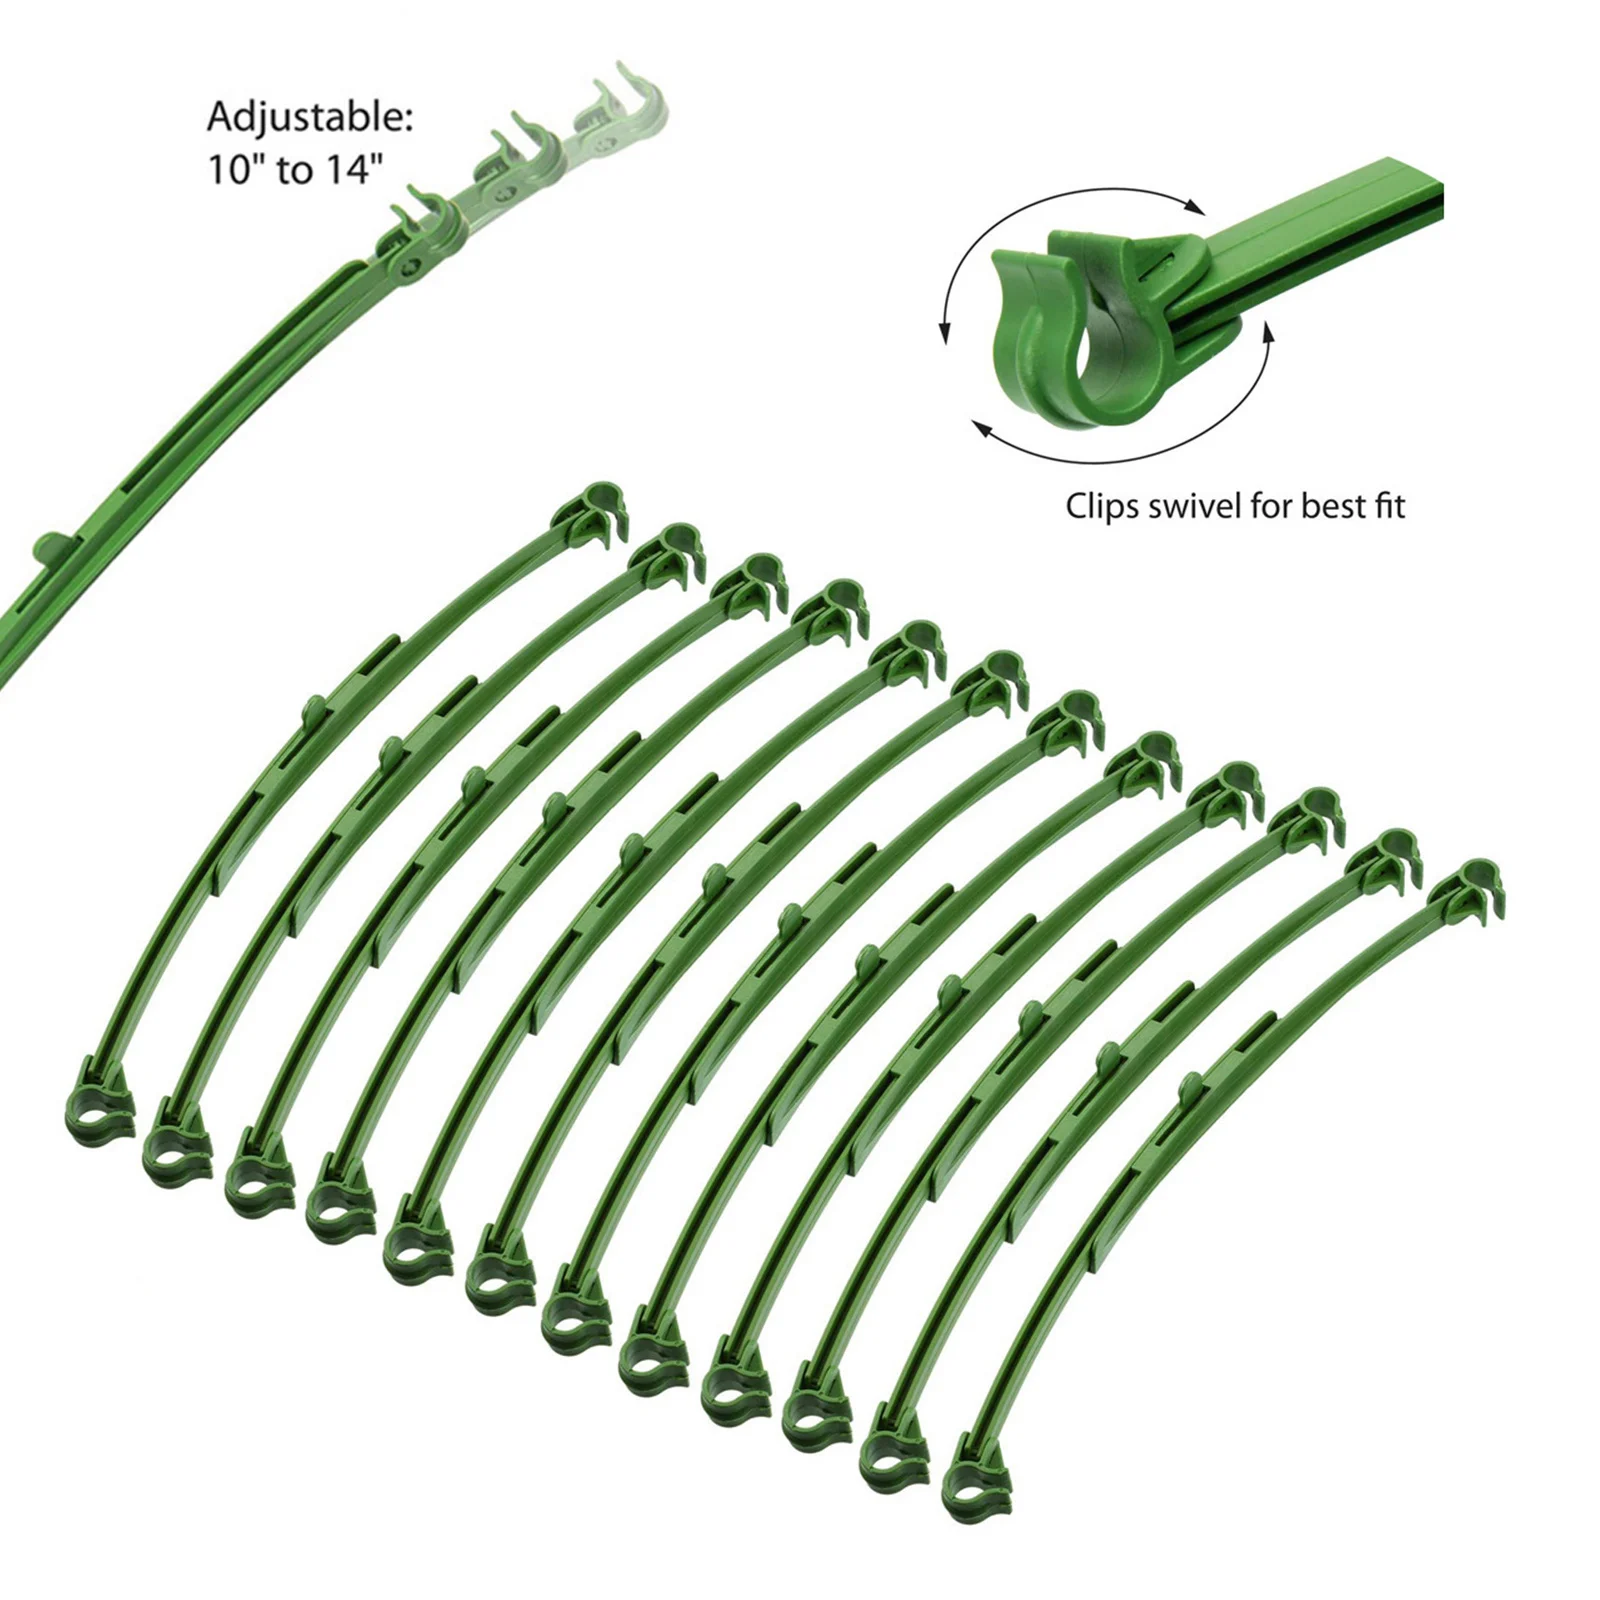 Details about   12 Pieces Trellis Garden Plant Stake Arms With Clamps for Tomato Cage Connectors 